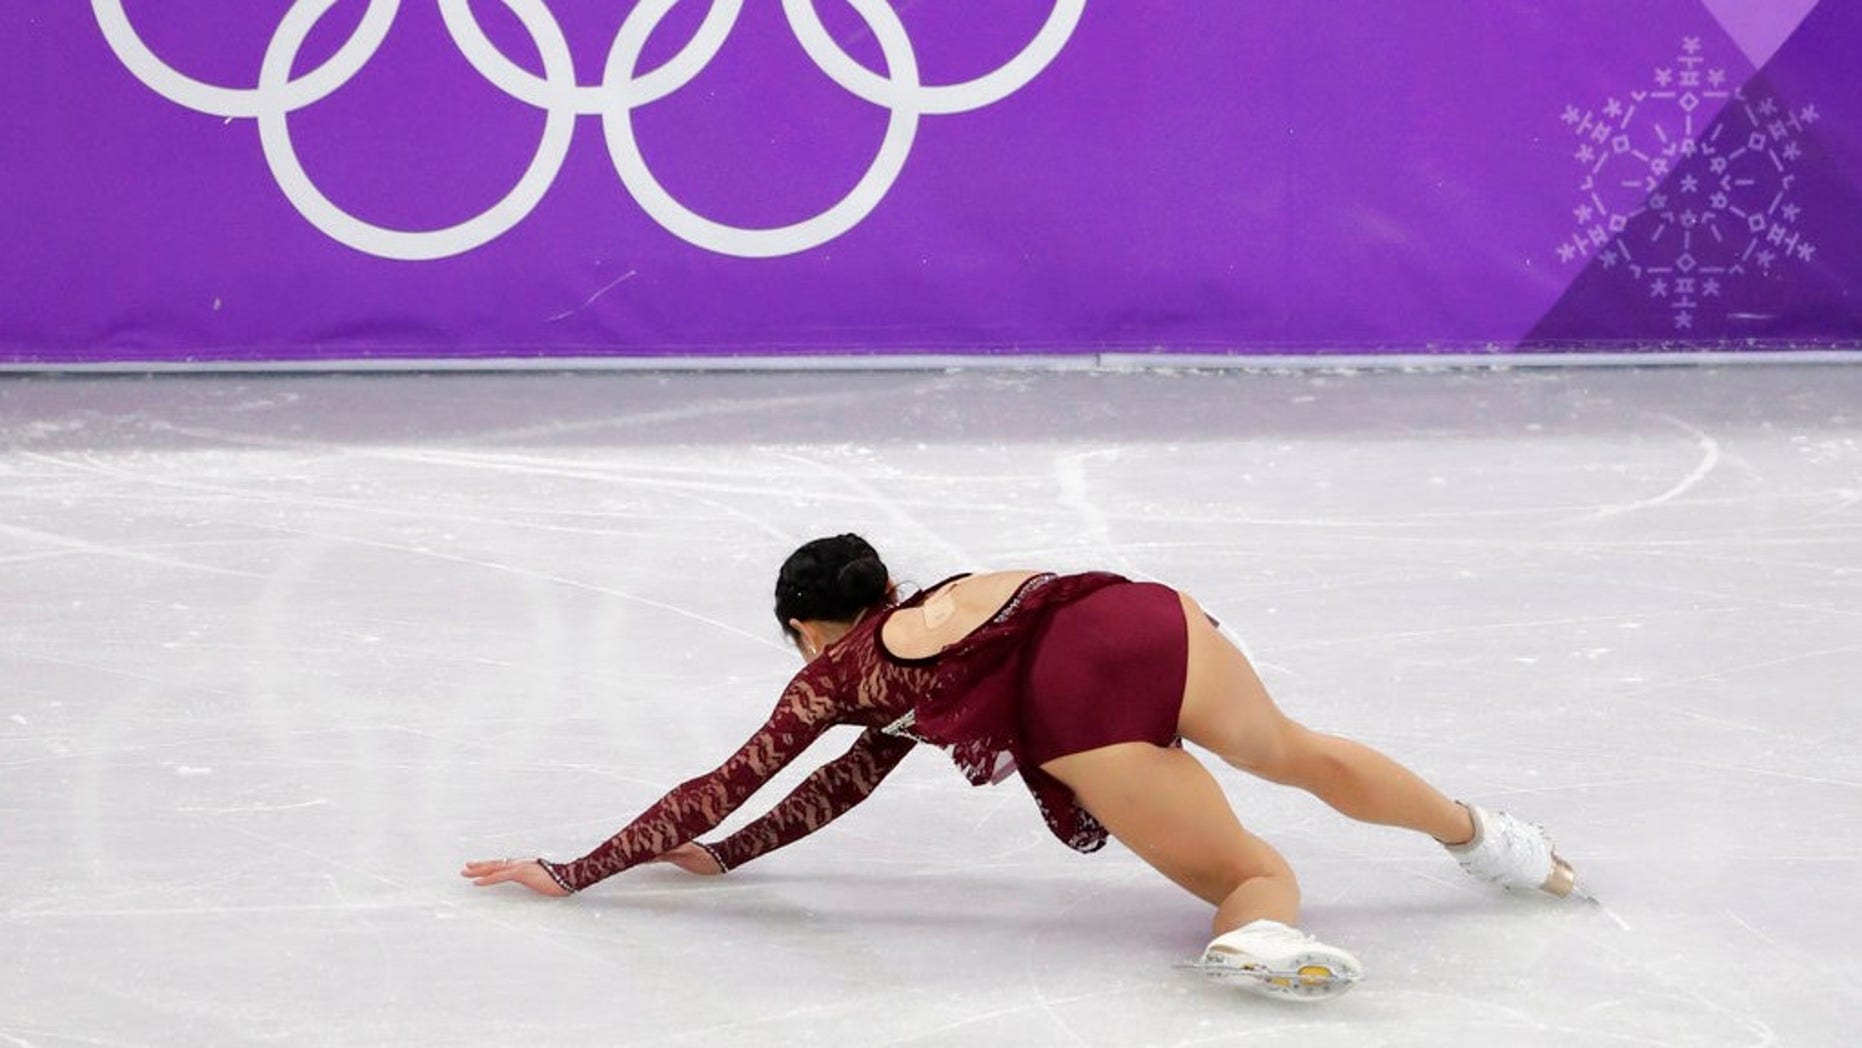 Us Figure Skaters Suffer Rough Falls During Womens Short Program In 